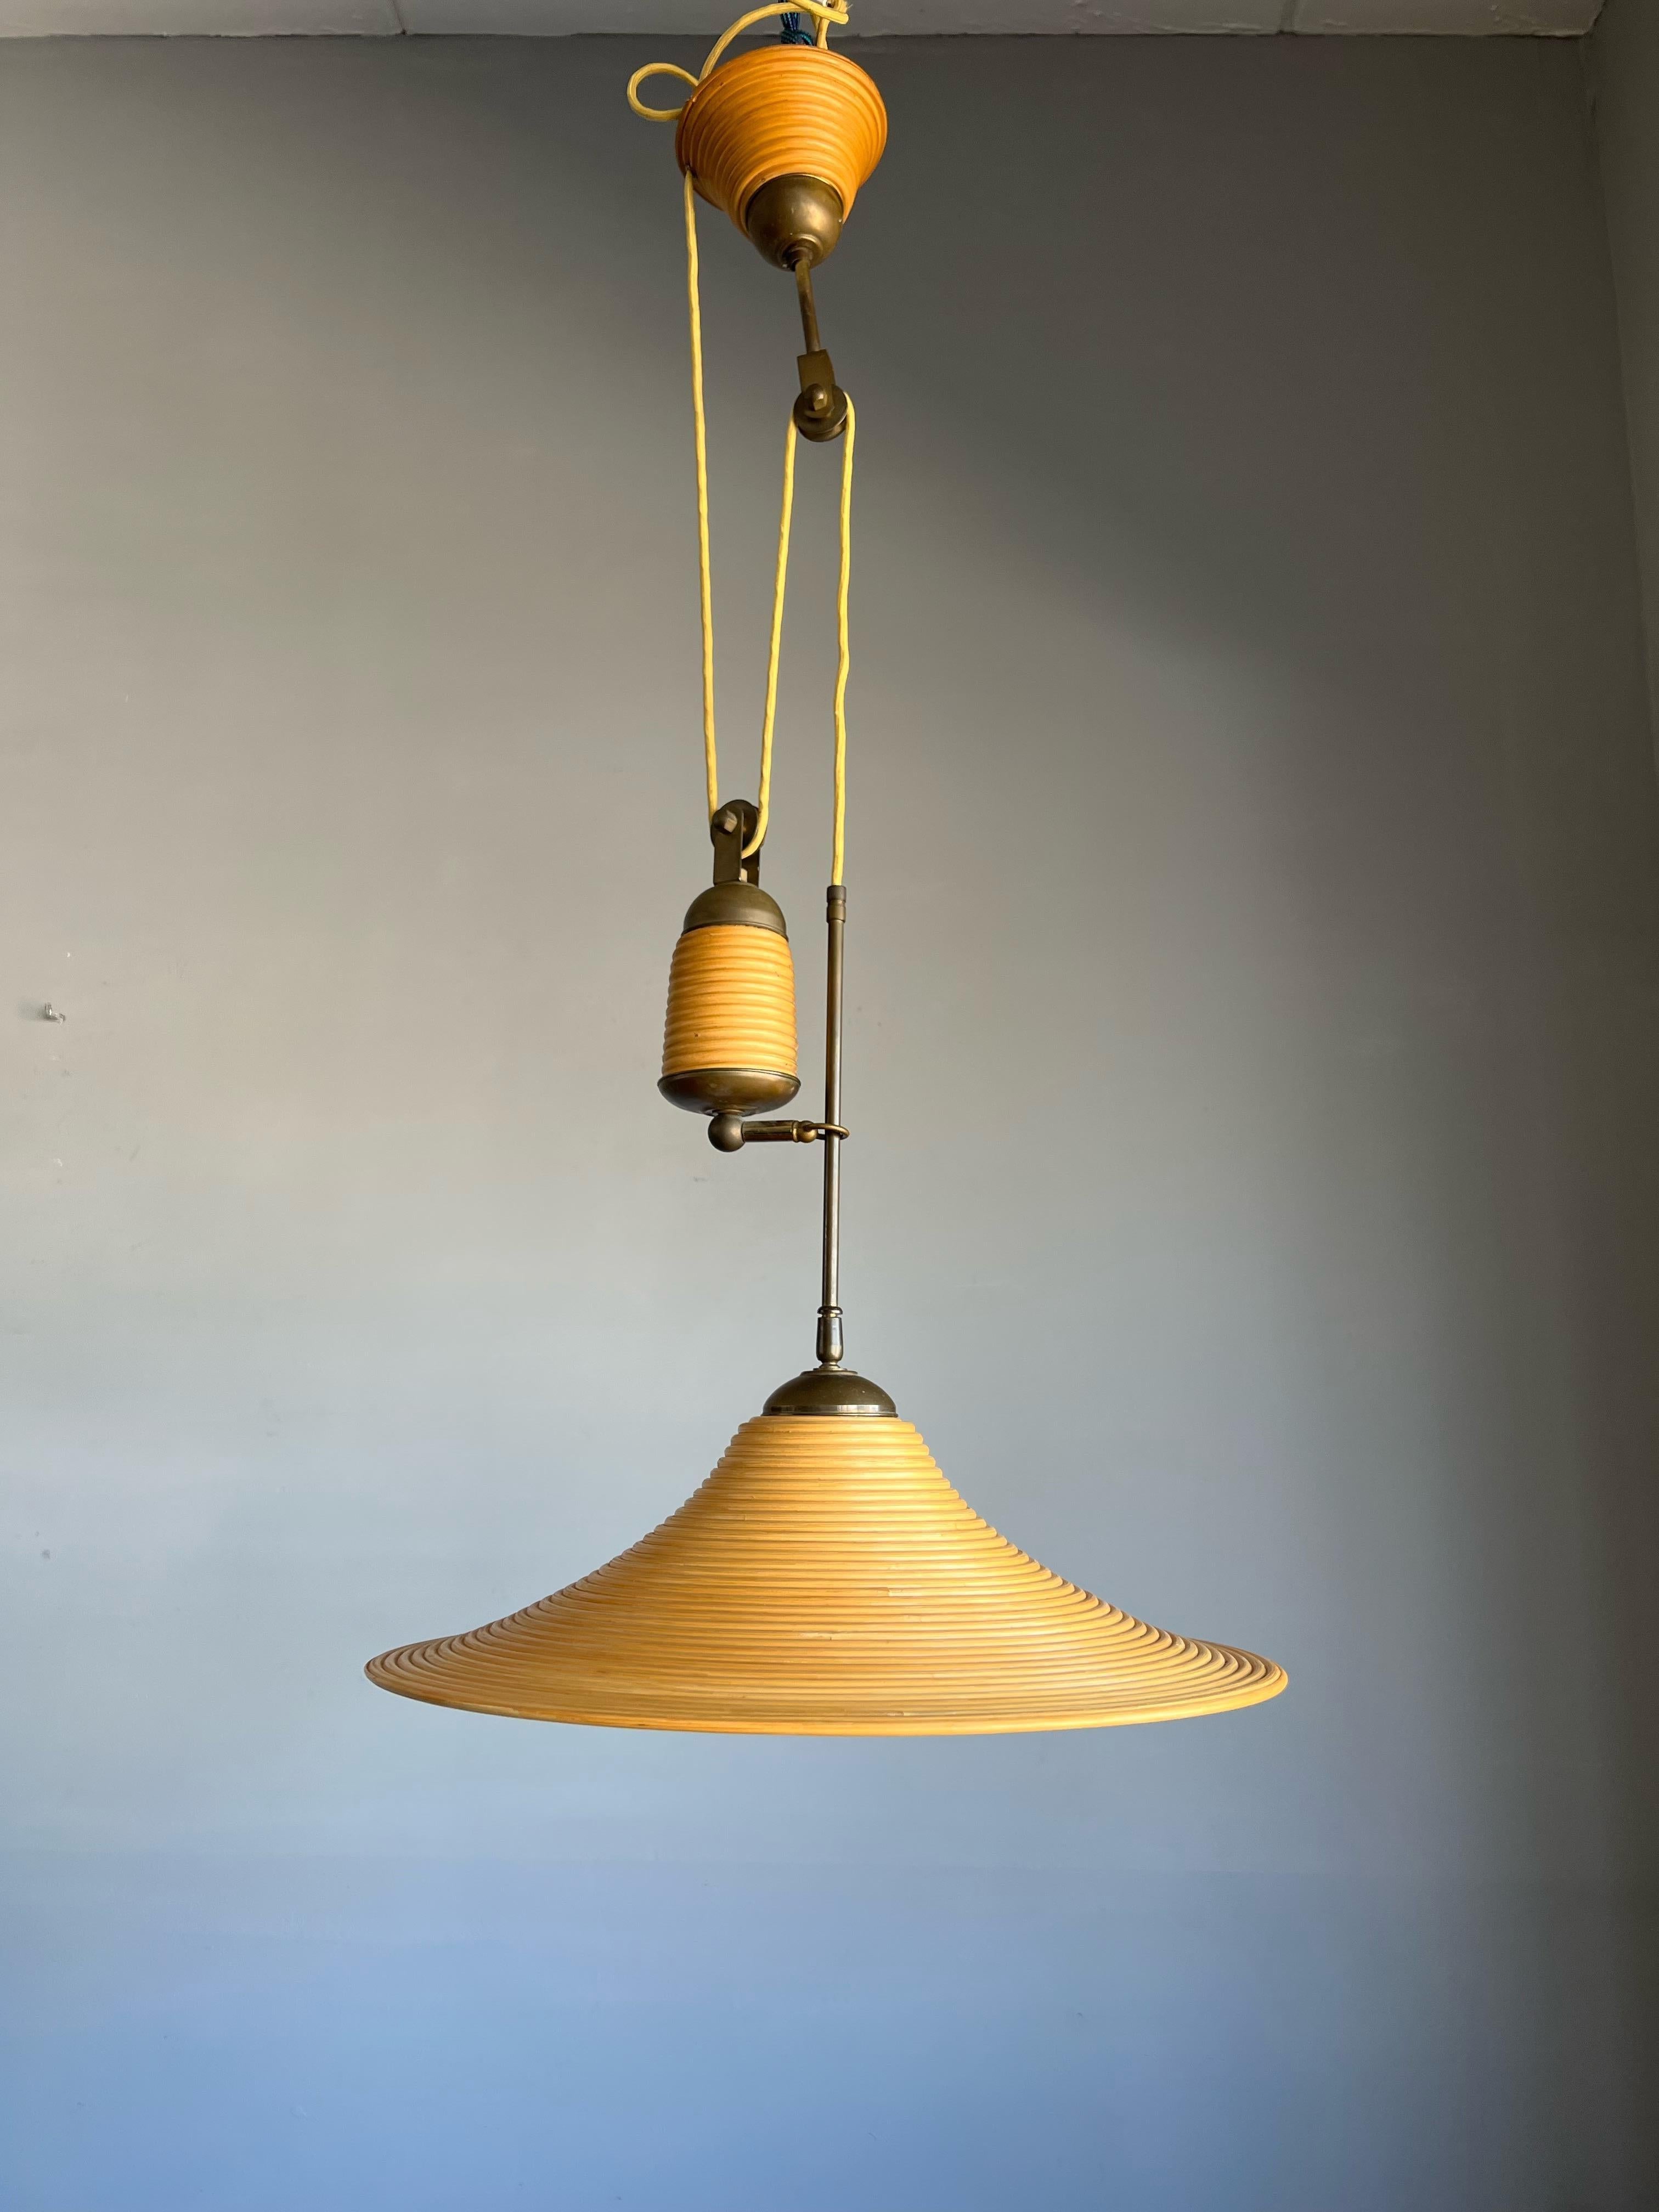 Stylish midcentury made and height adjustable light fixture.

This rare 1970s light fixture is ideal for bringing good style and the perfect kind of light to your midcentury kitchen, hallway, living room, landing etc. This pendant comes with a